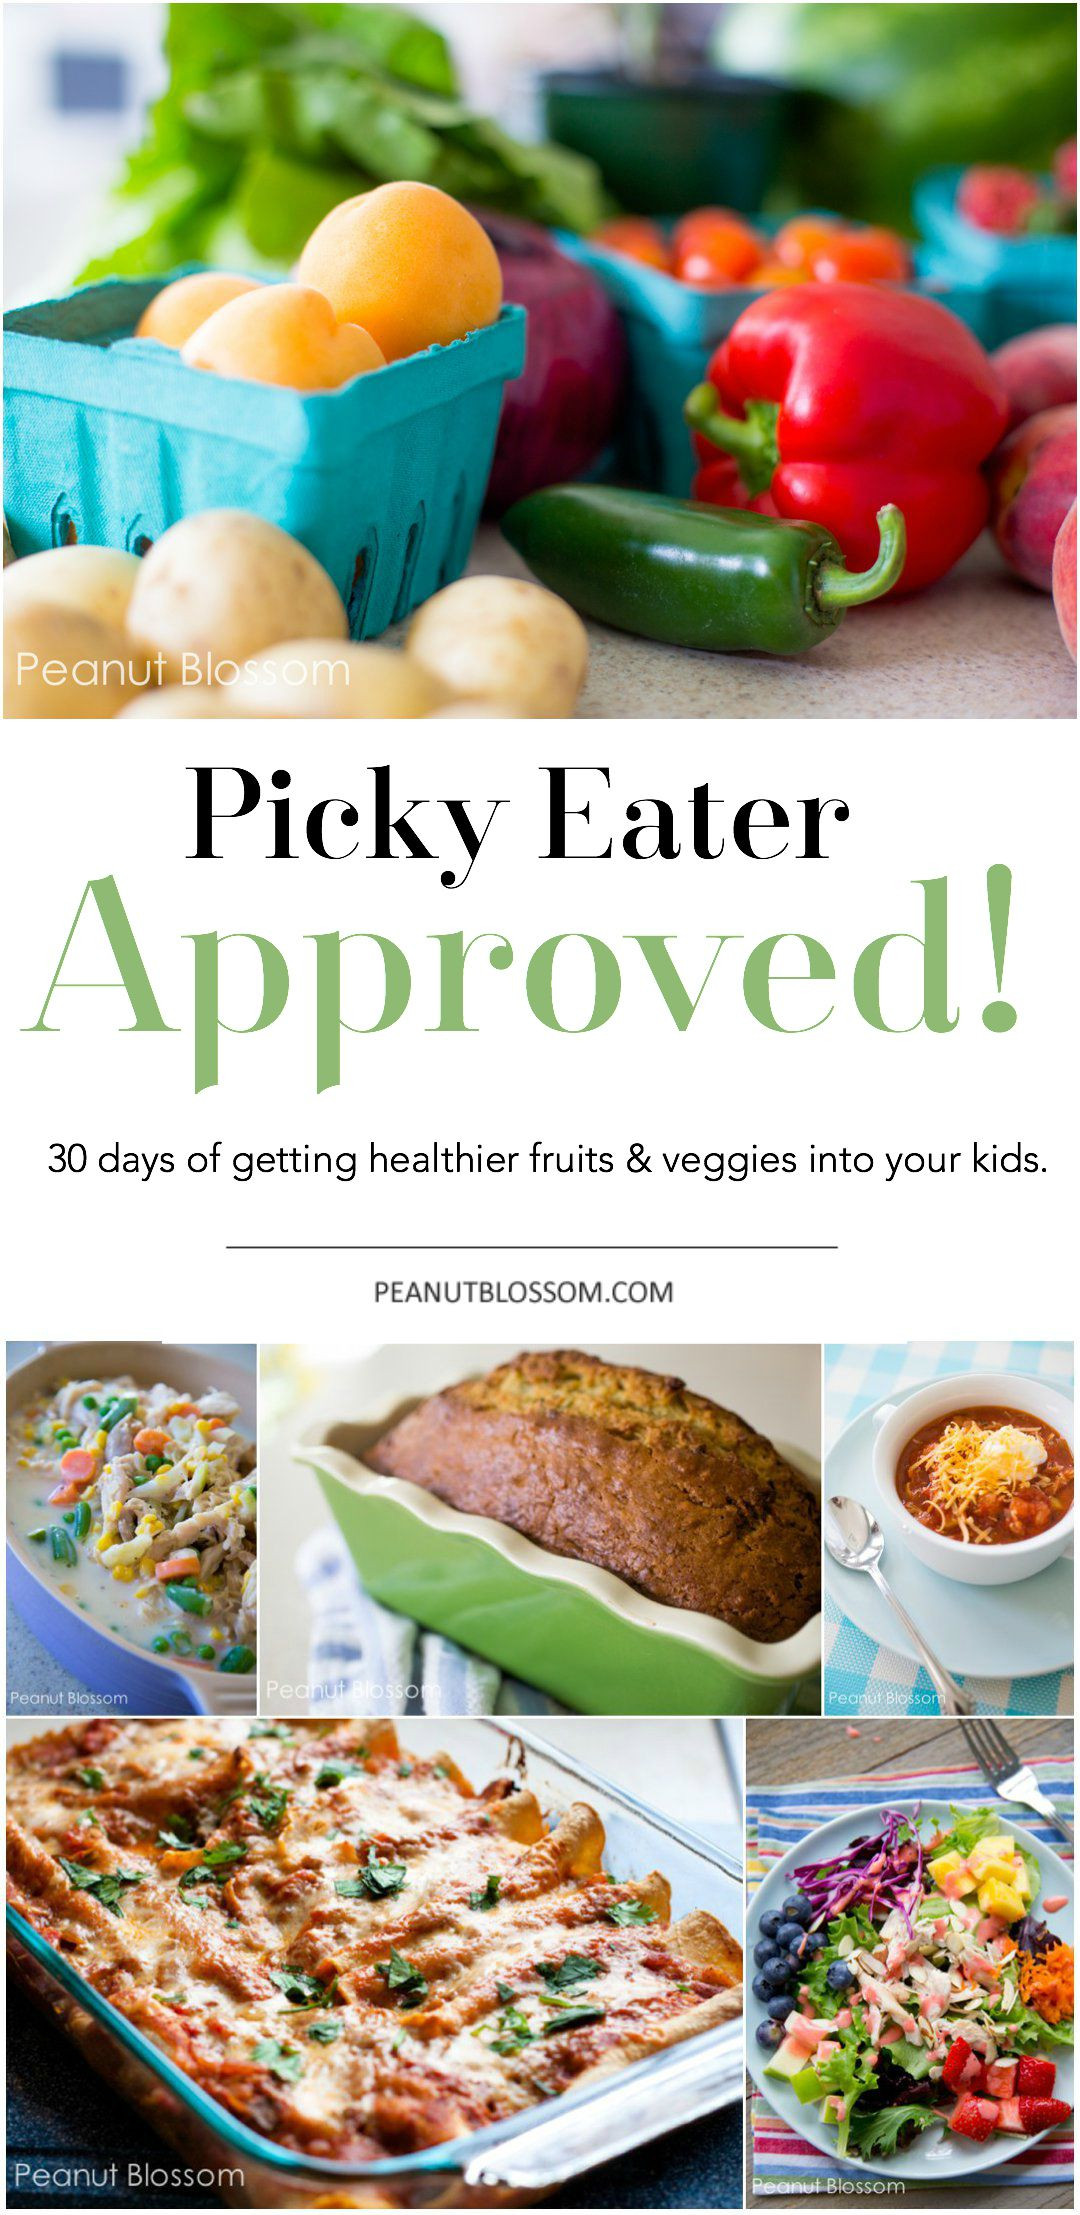 Vegetarian Recipes For Picky Eaters
 30 Days of Veggies helping picky eaters eat better